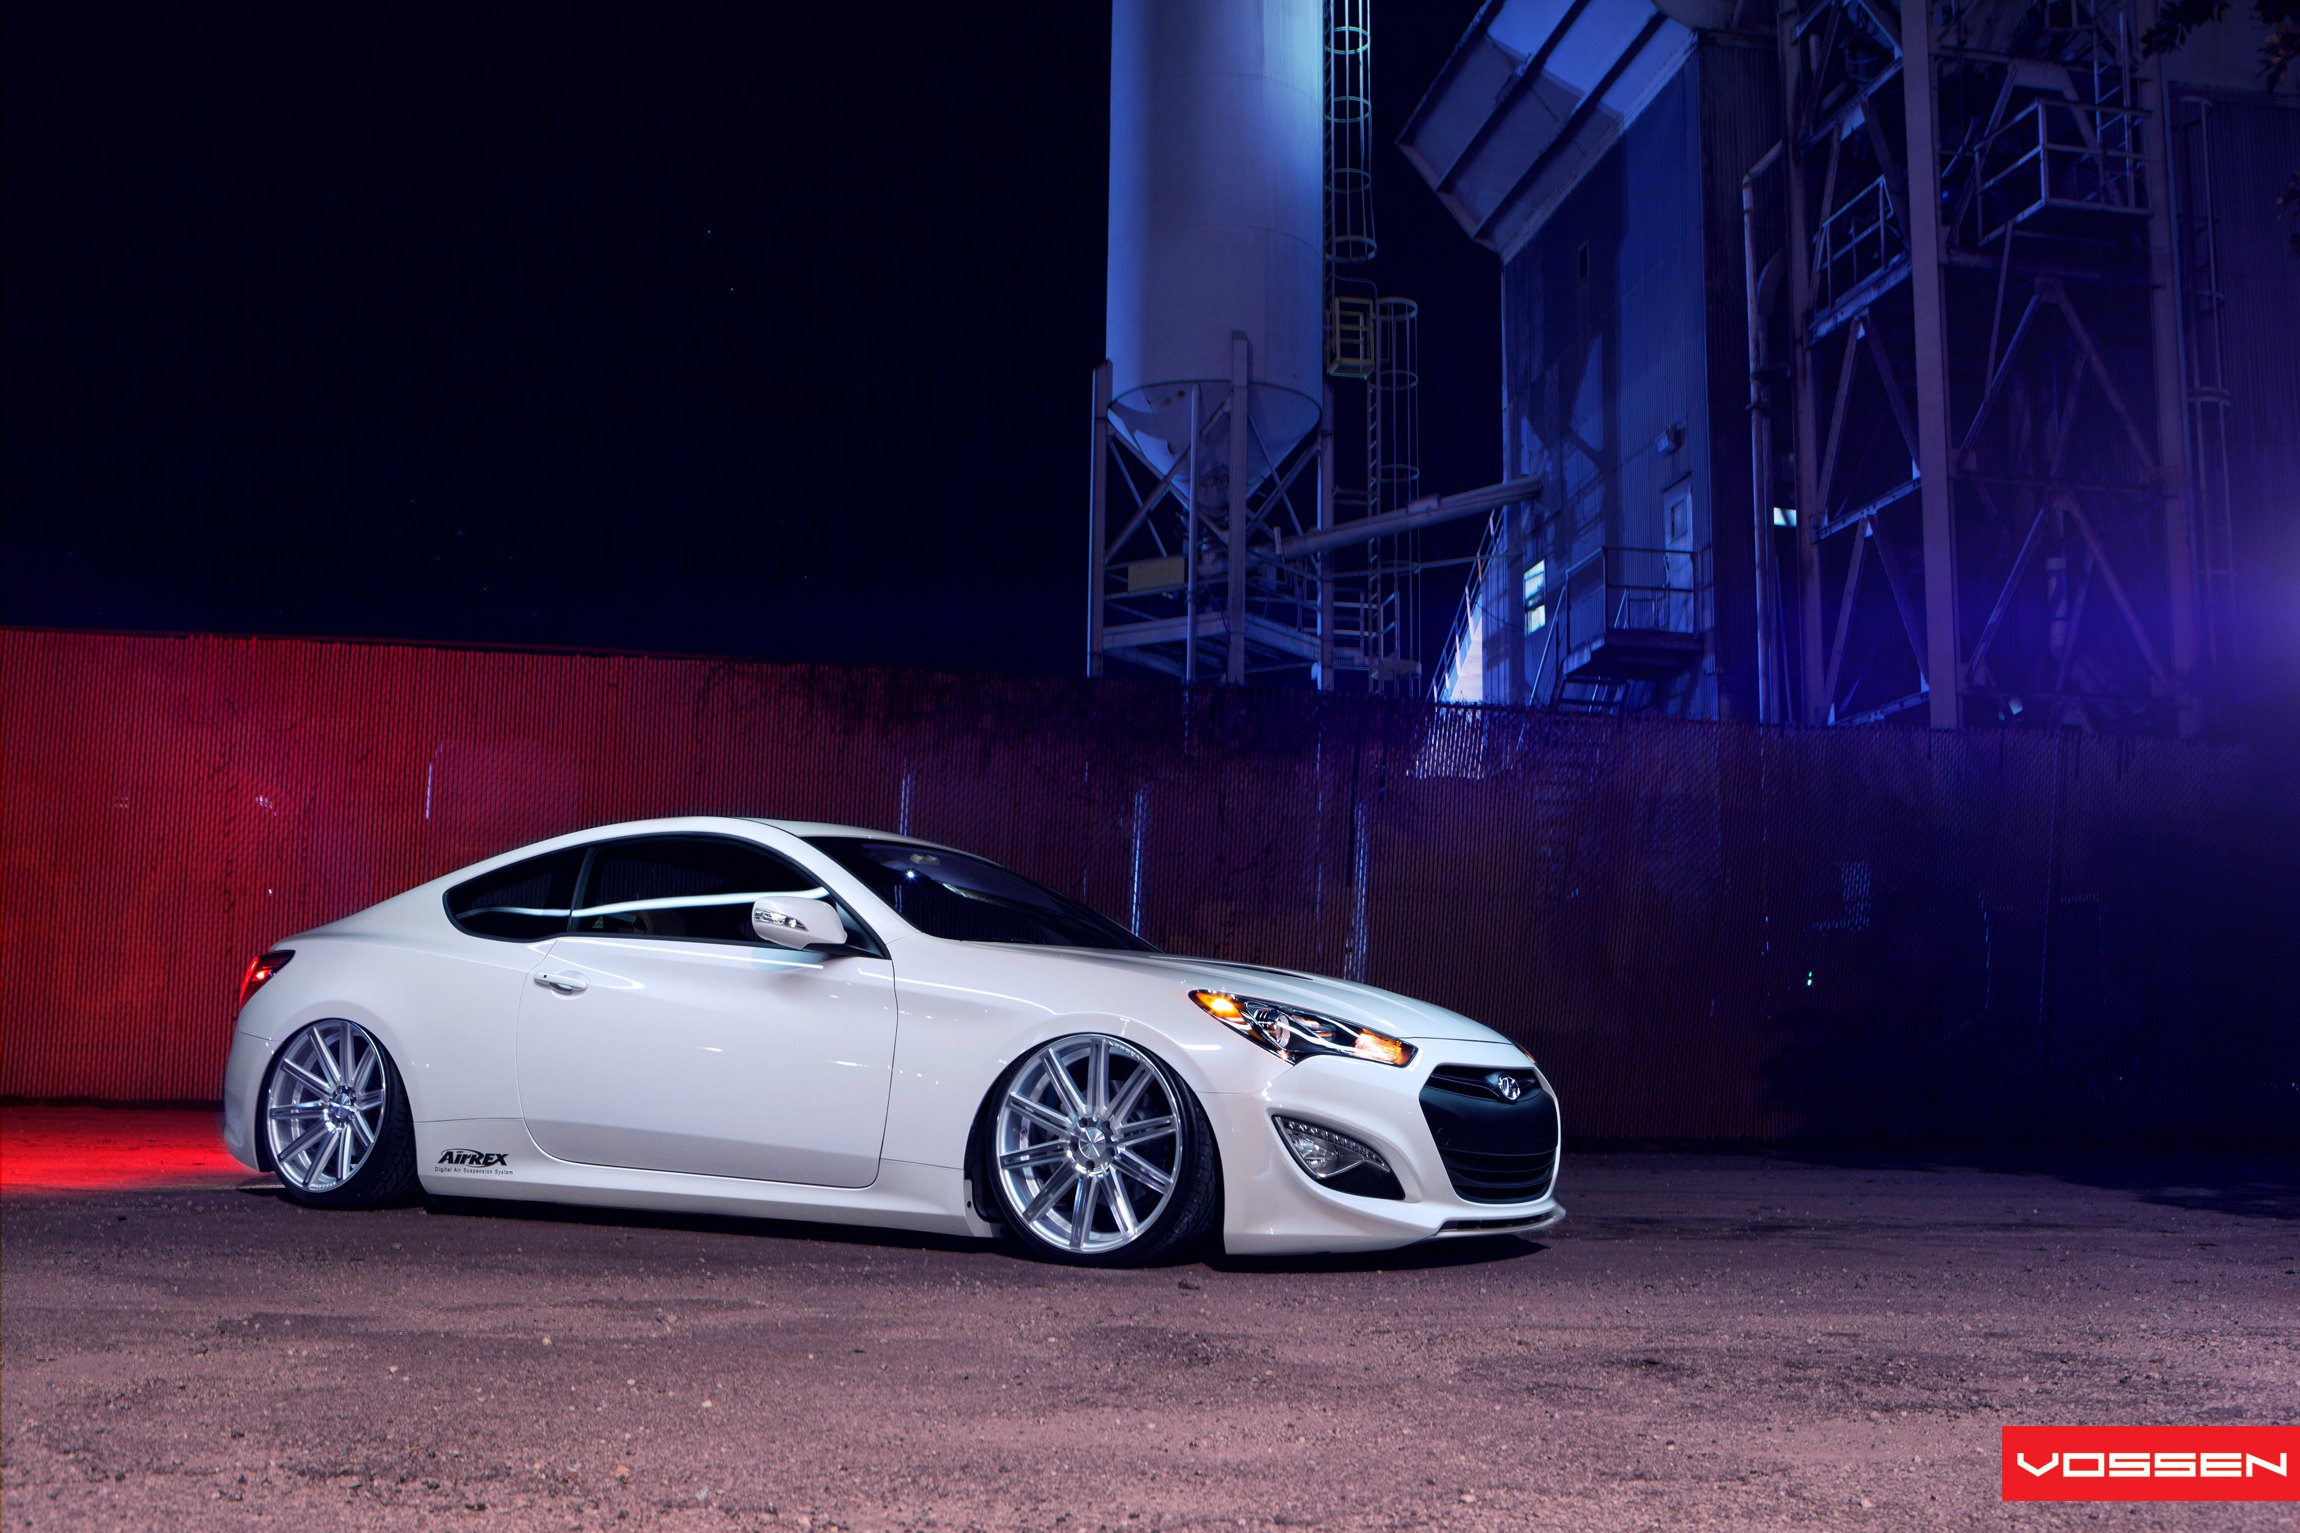 White Hyundai Genesis Coupe with Aftermarket Front Bumper - Photo by Vossen